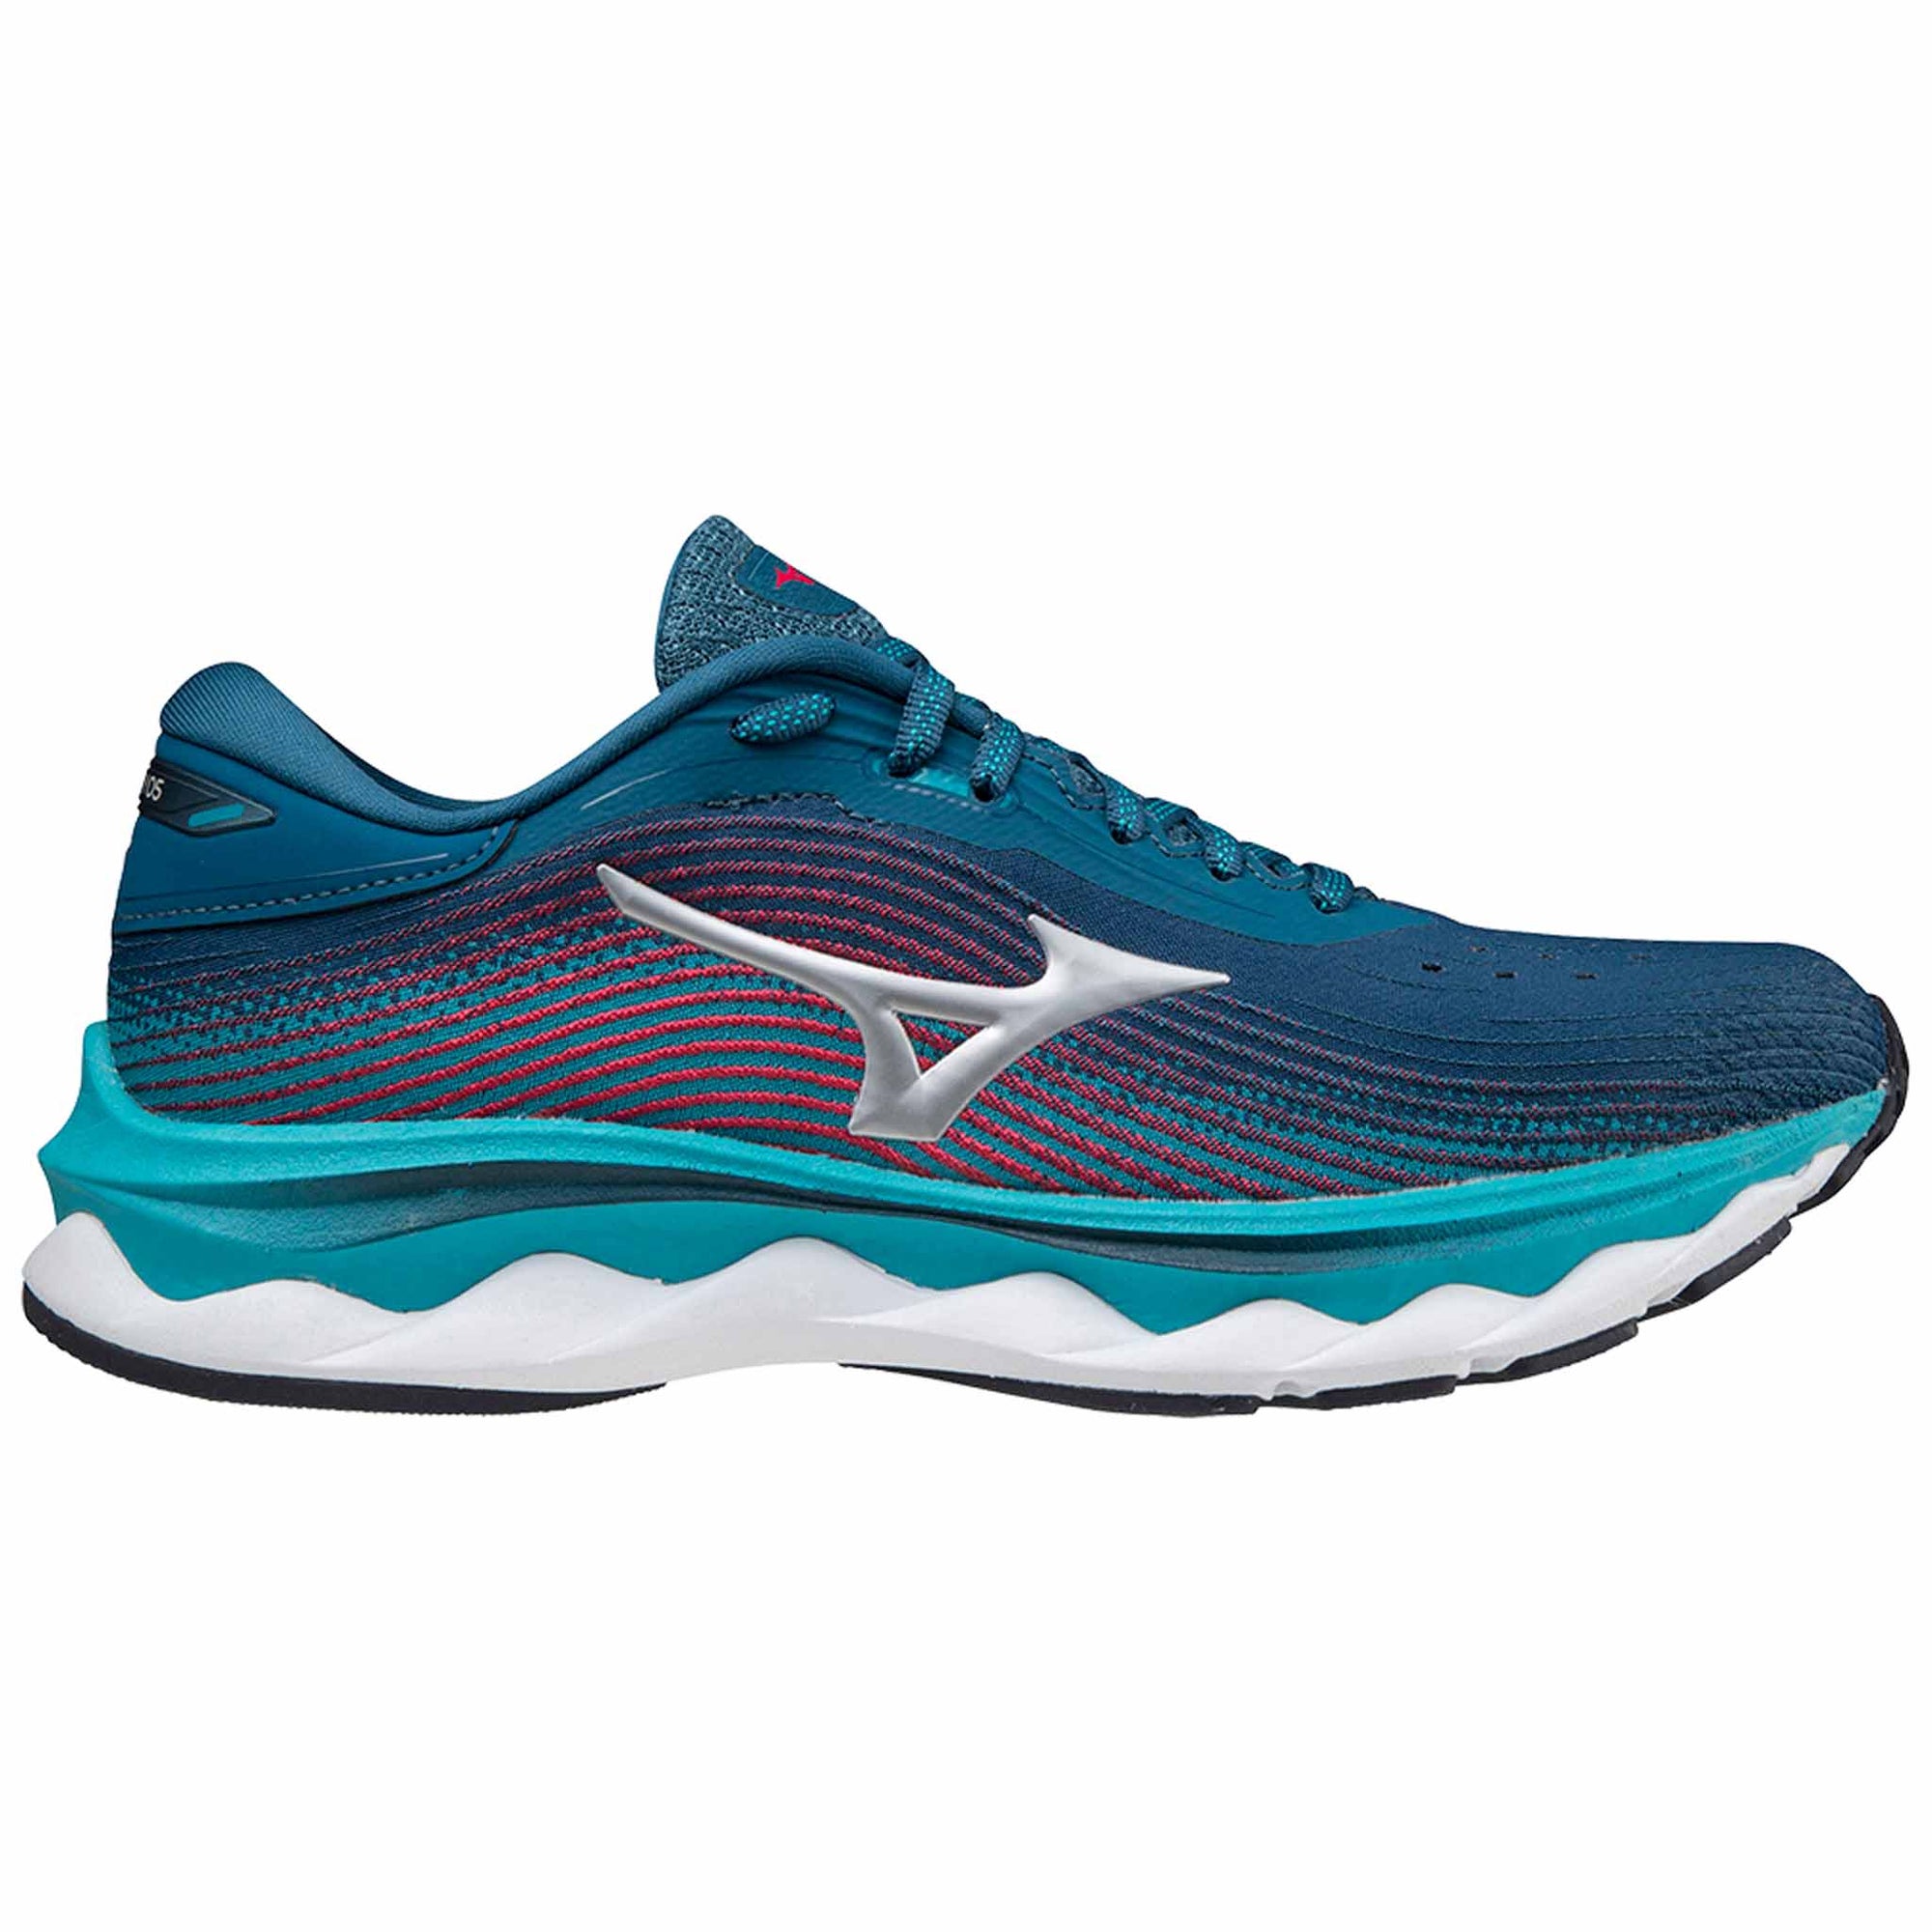 mizuno chaussures volley femme,Quality 